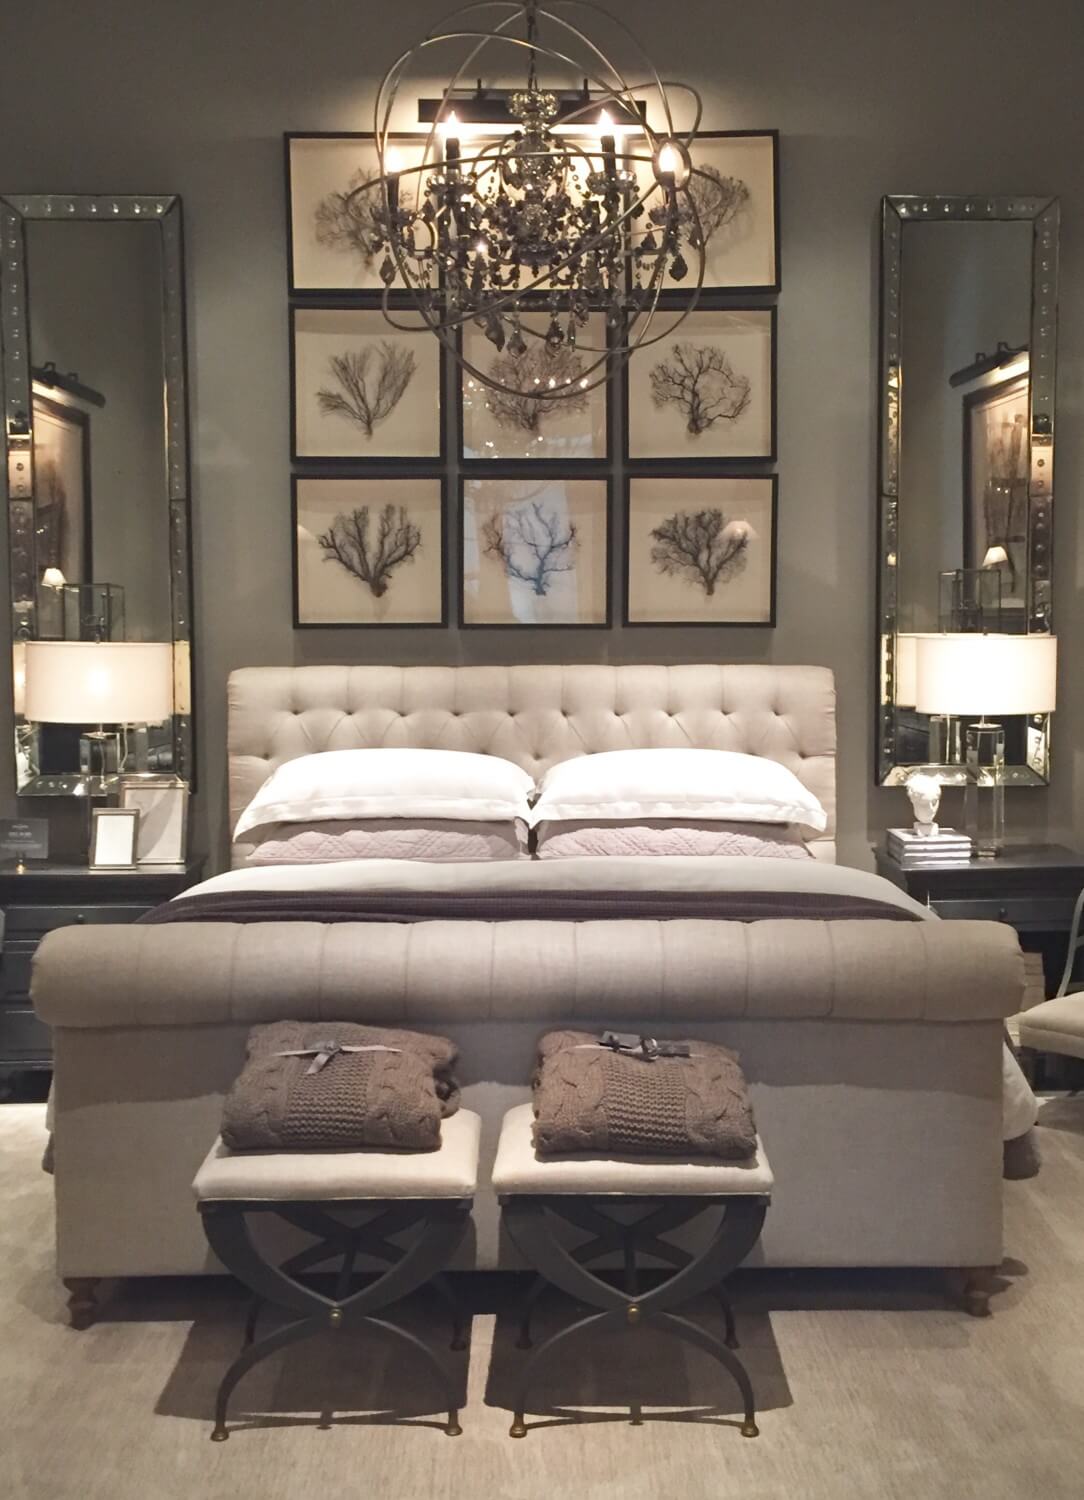 Sleek Silhouettes and Sharp Lines Perfect this Glamorous Grey Haven Bedroom